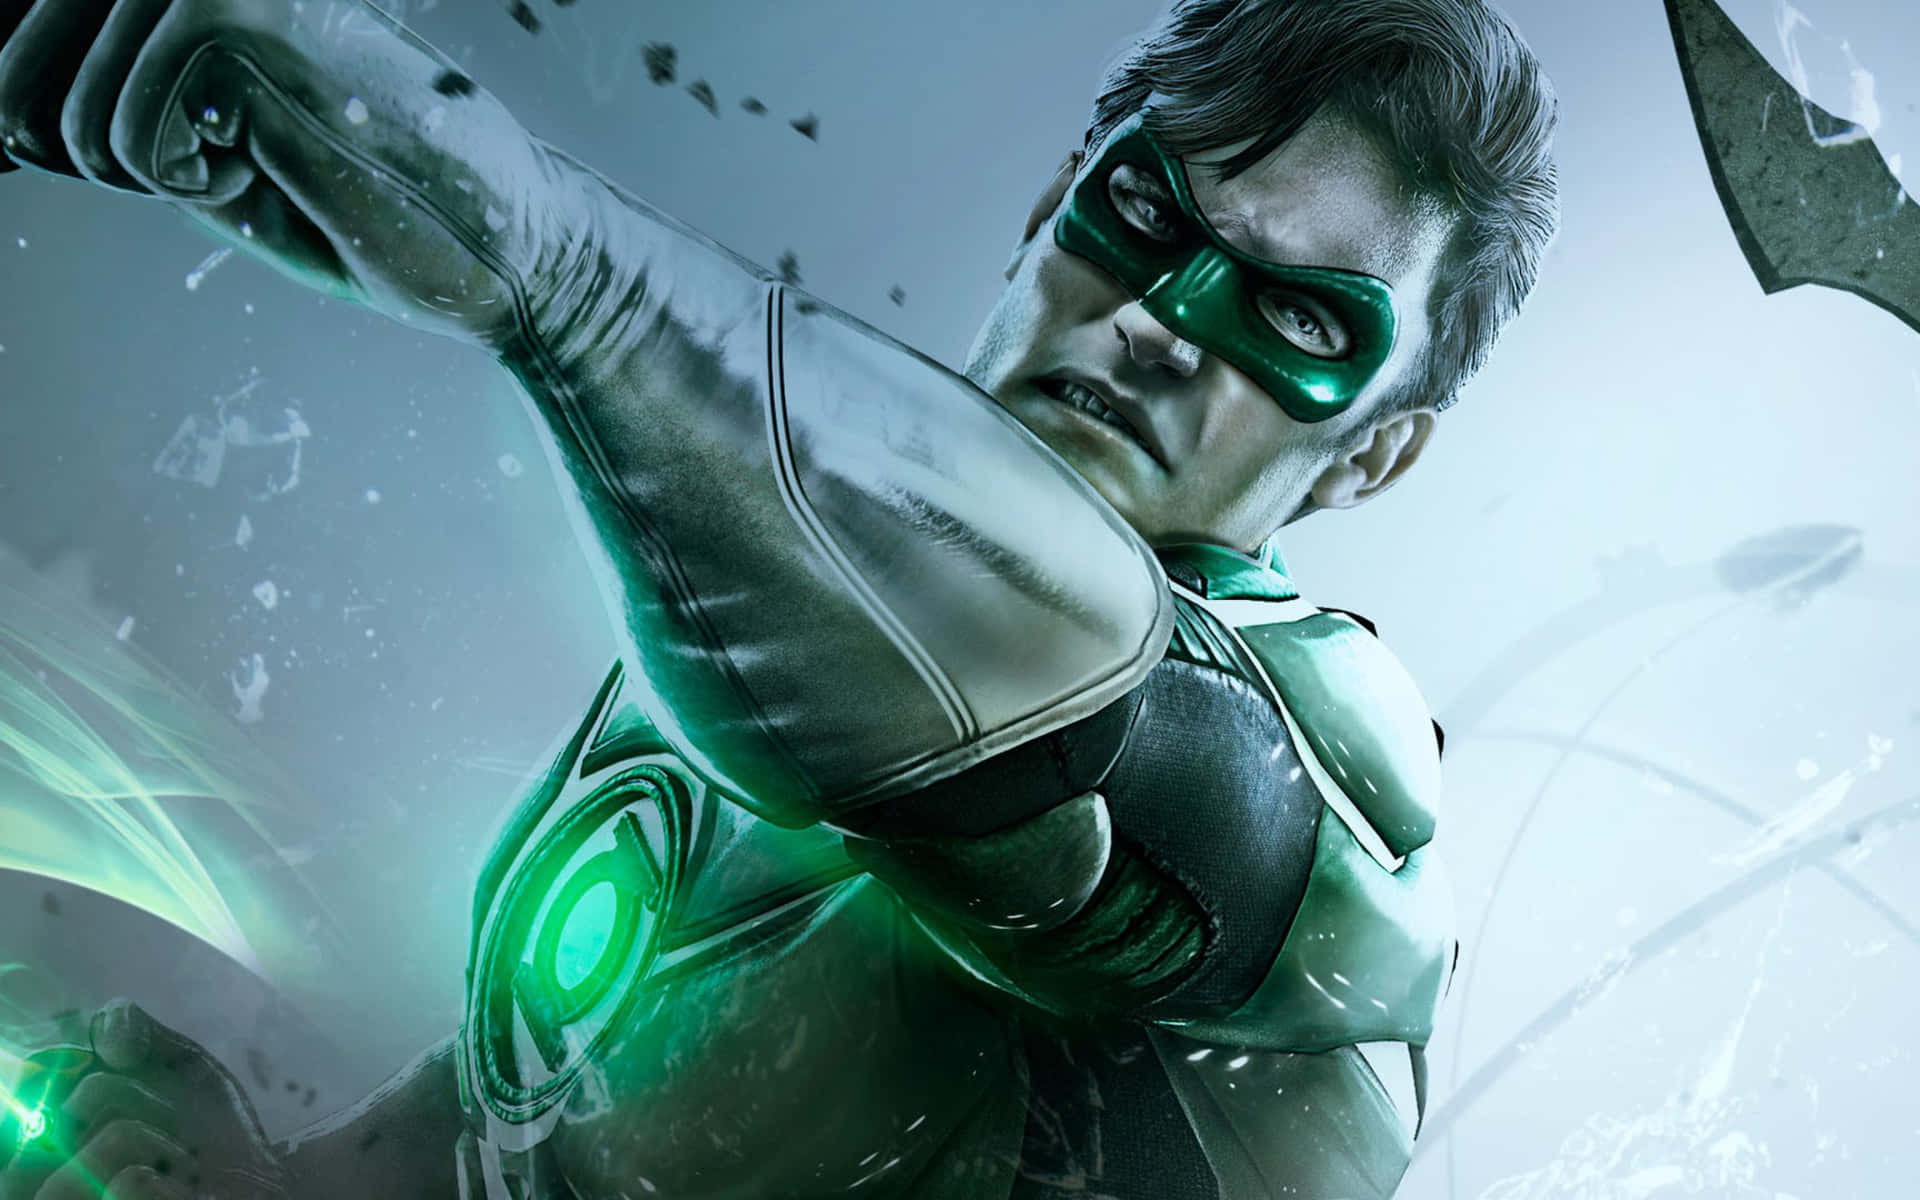 "A shining beacon of hope and justice - the Green Lantern"